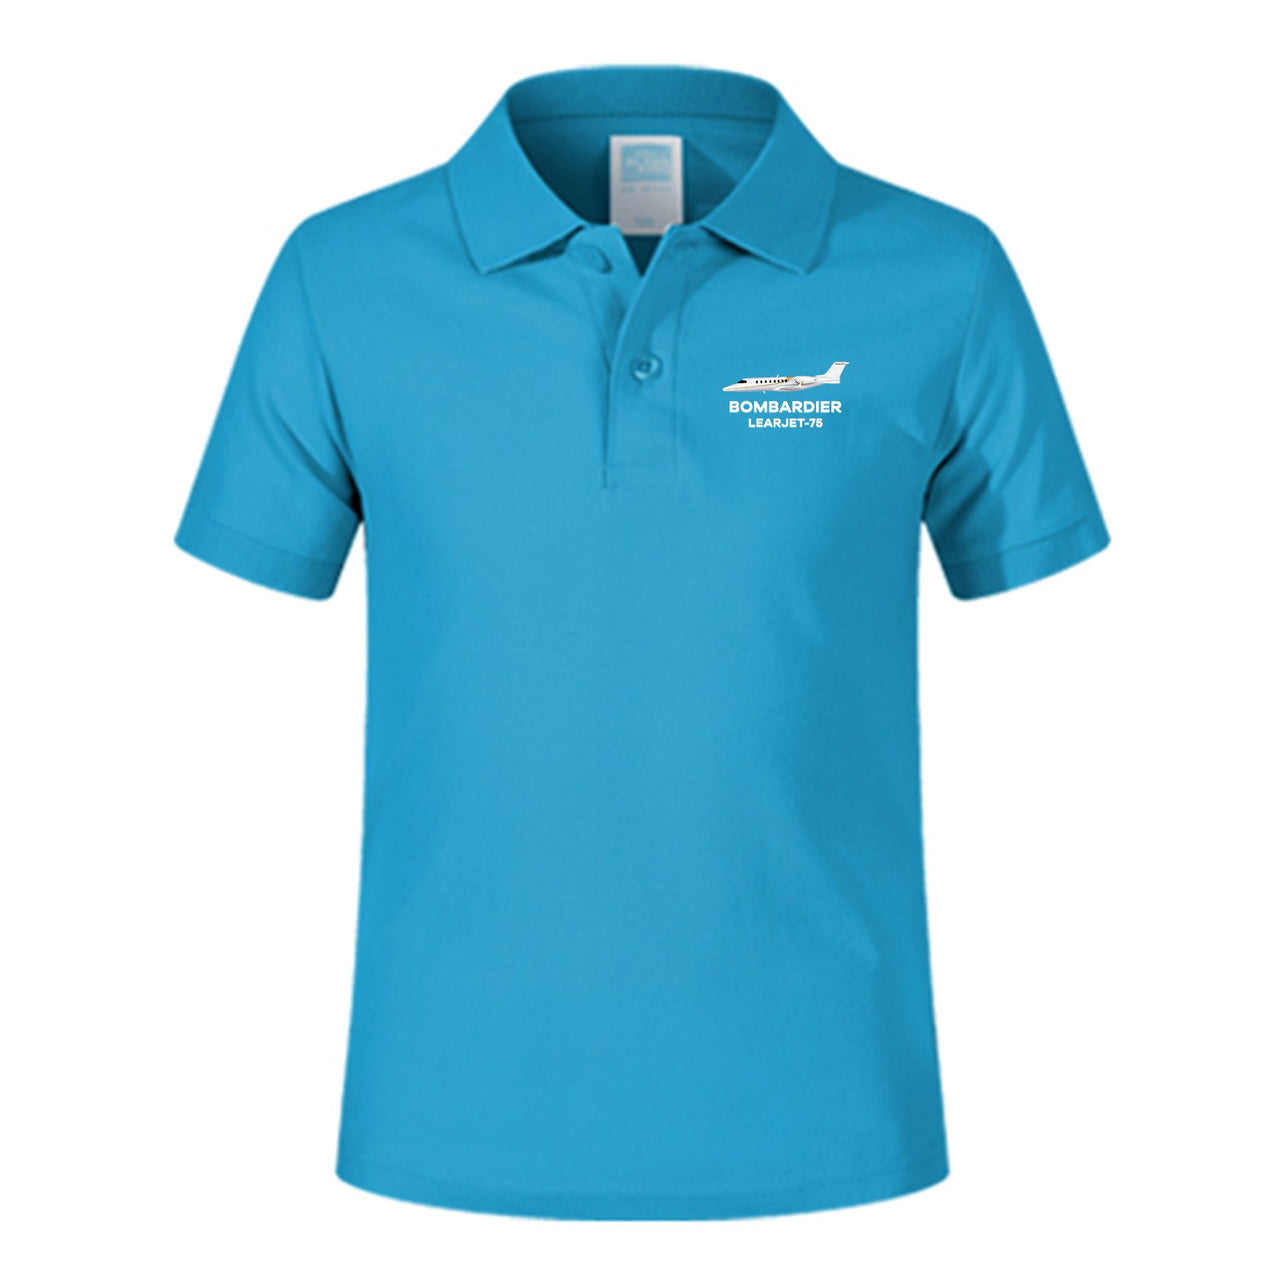 The Bombardier Learjet 75 Designed Children Polo T-Shirts